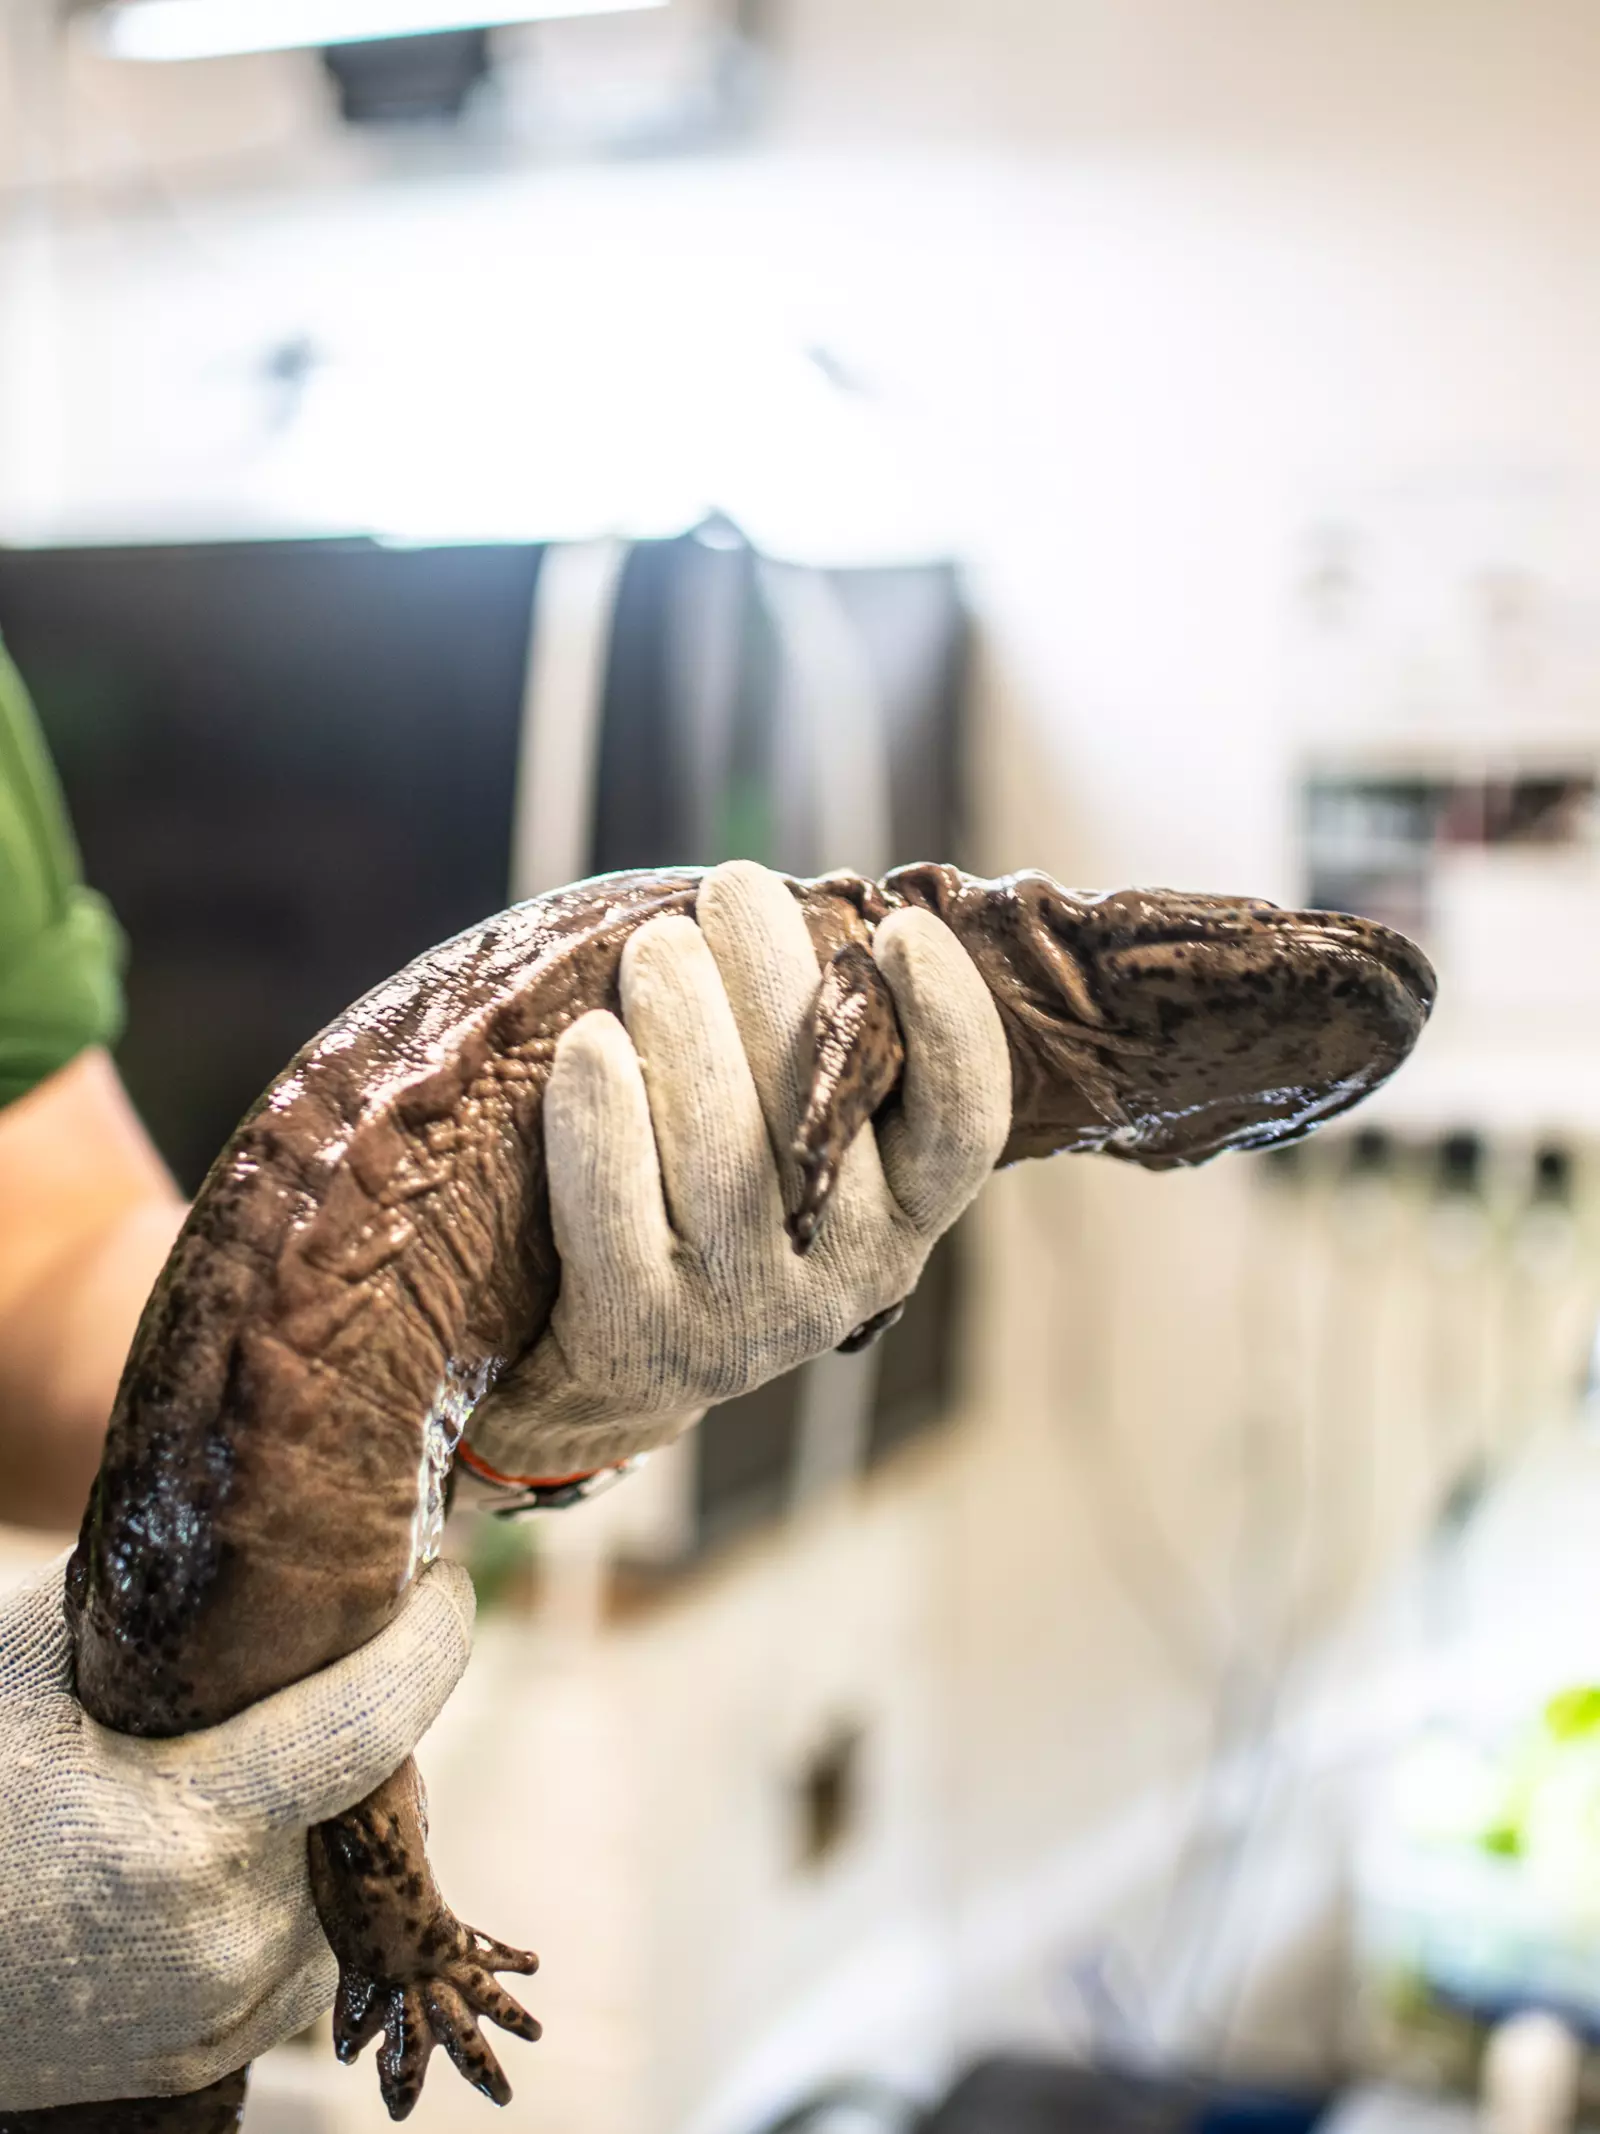 Chinese giant salamander being examined for health checks at London Zoo